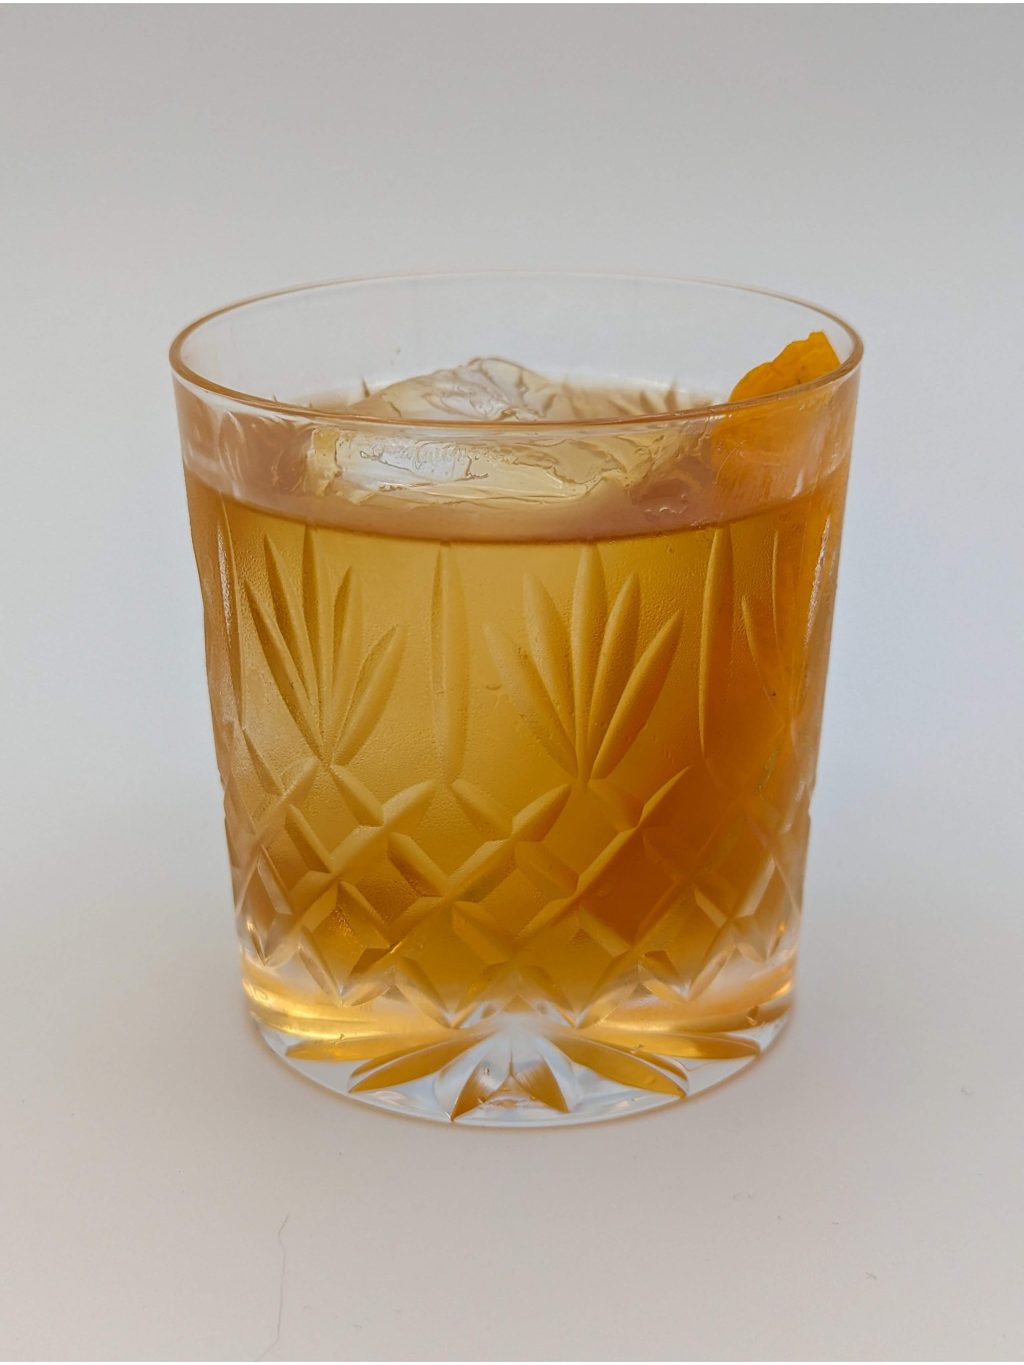 light golden brown liquid in a crystal glass with a large rock of ice and lemon peel garnish